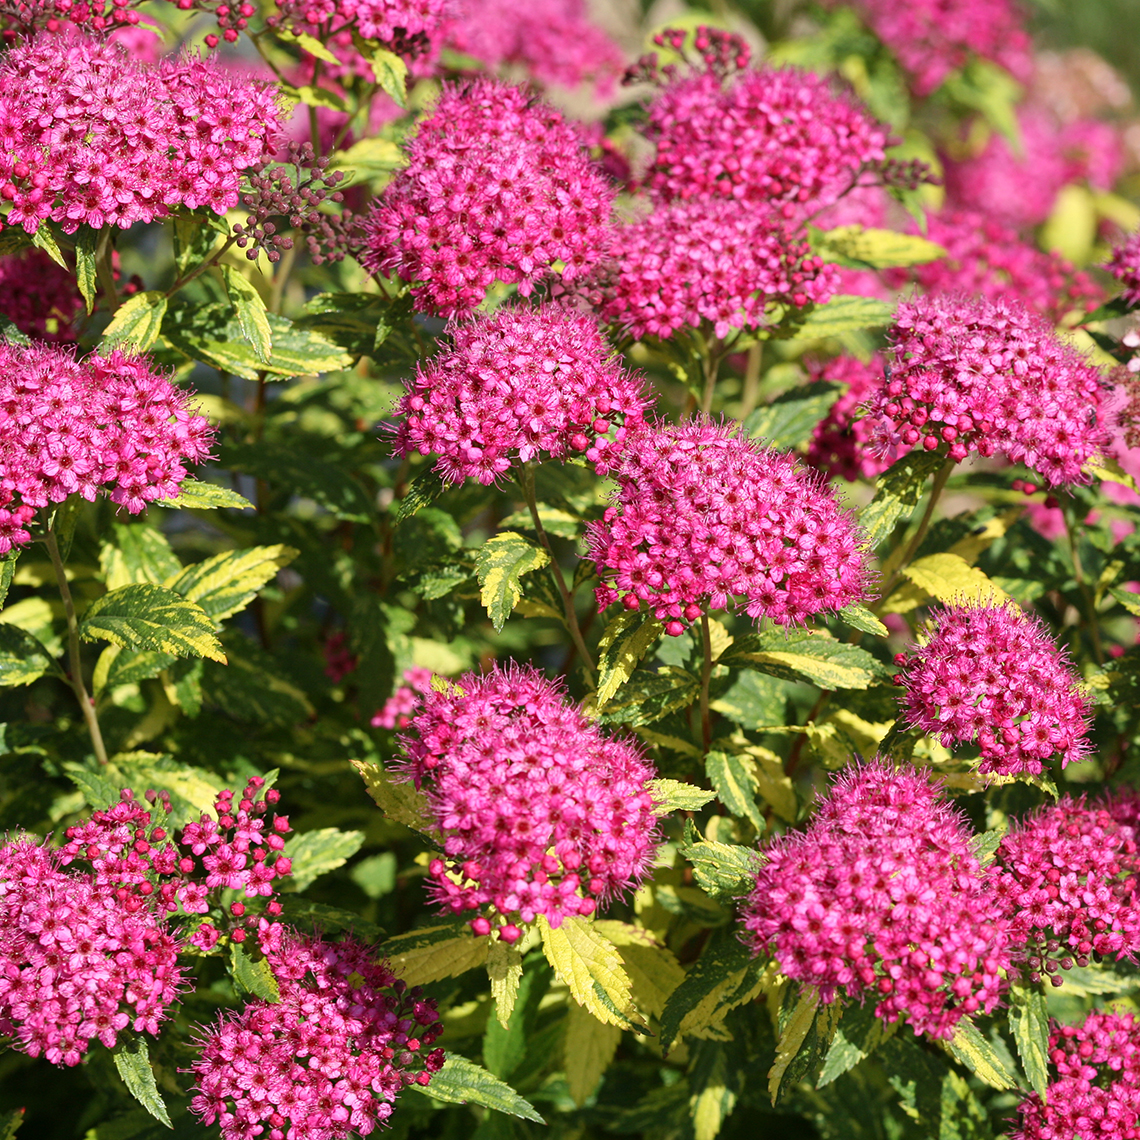 Double Play Painted Lady Spiraea's eye catching combination of hot pink flowers and yellow and green variegated foliage